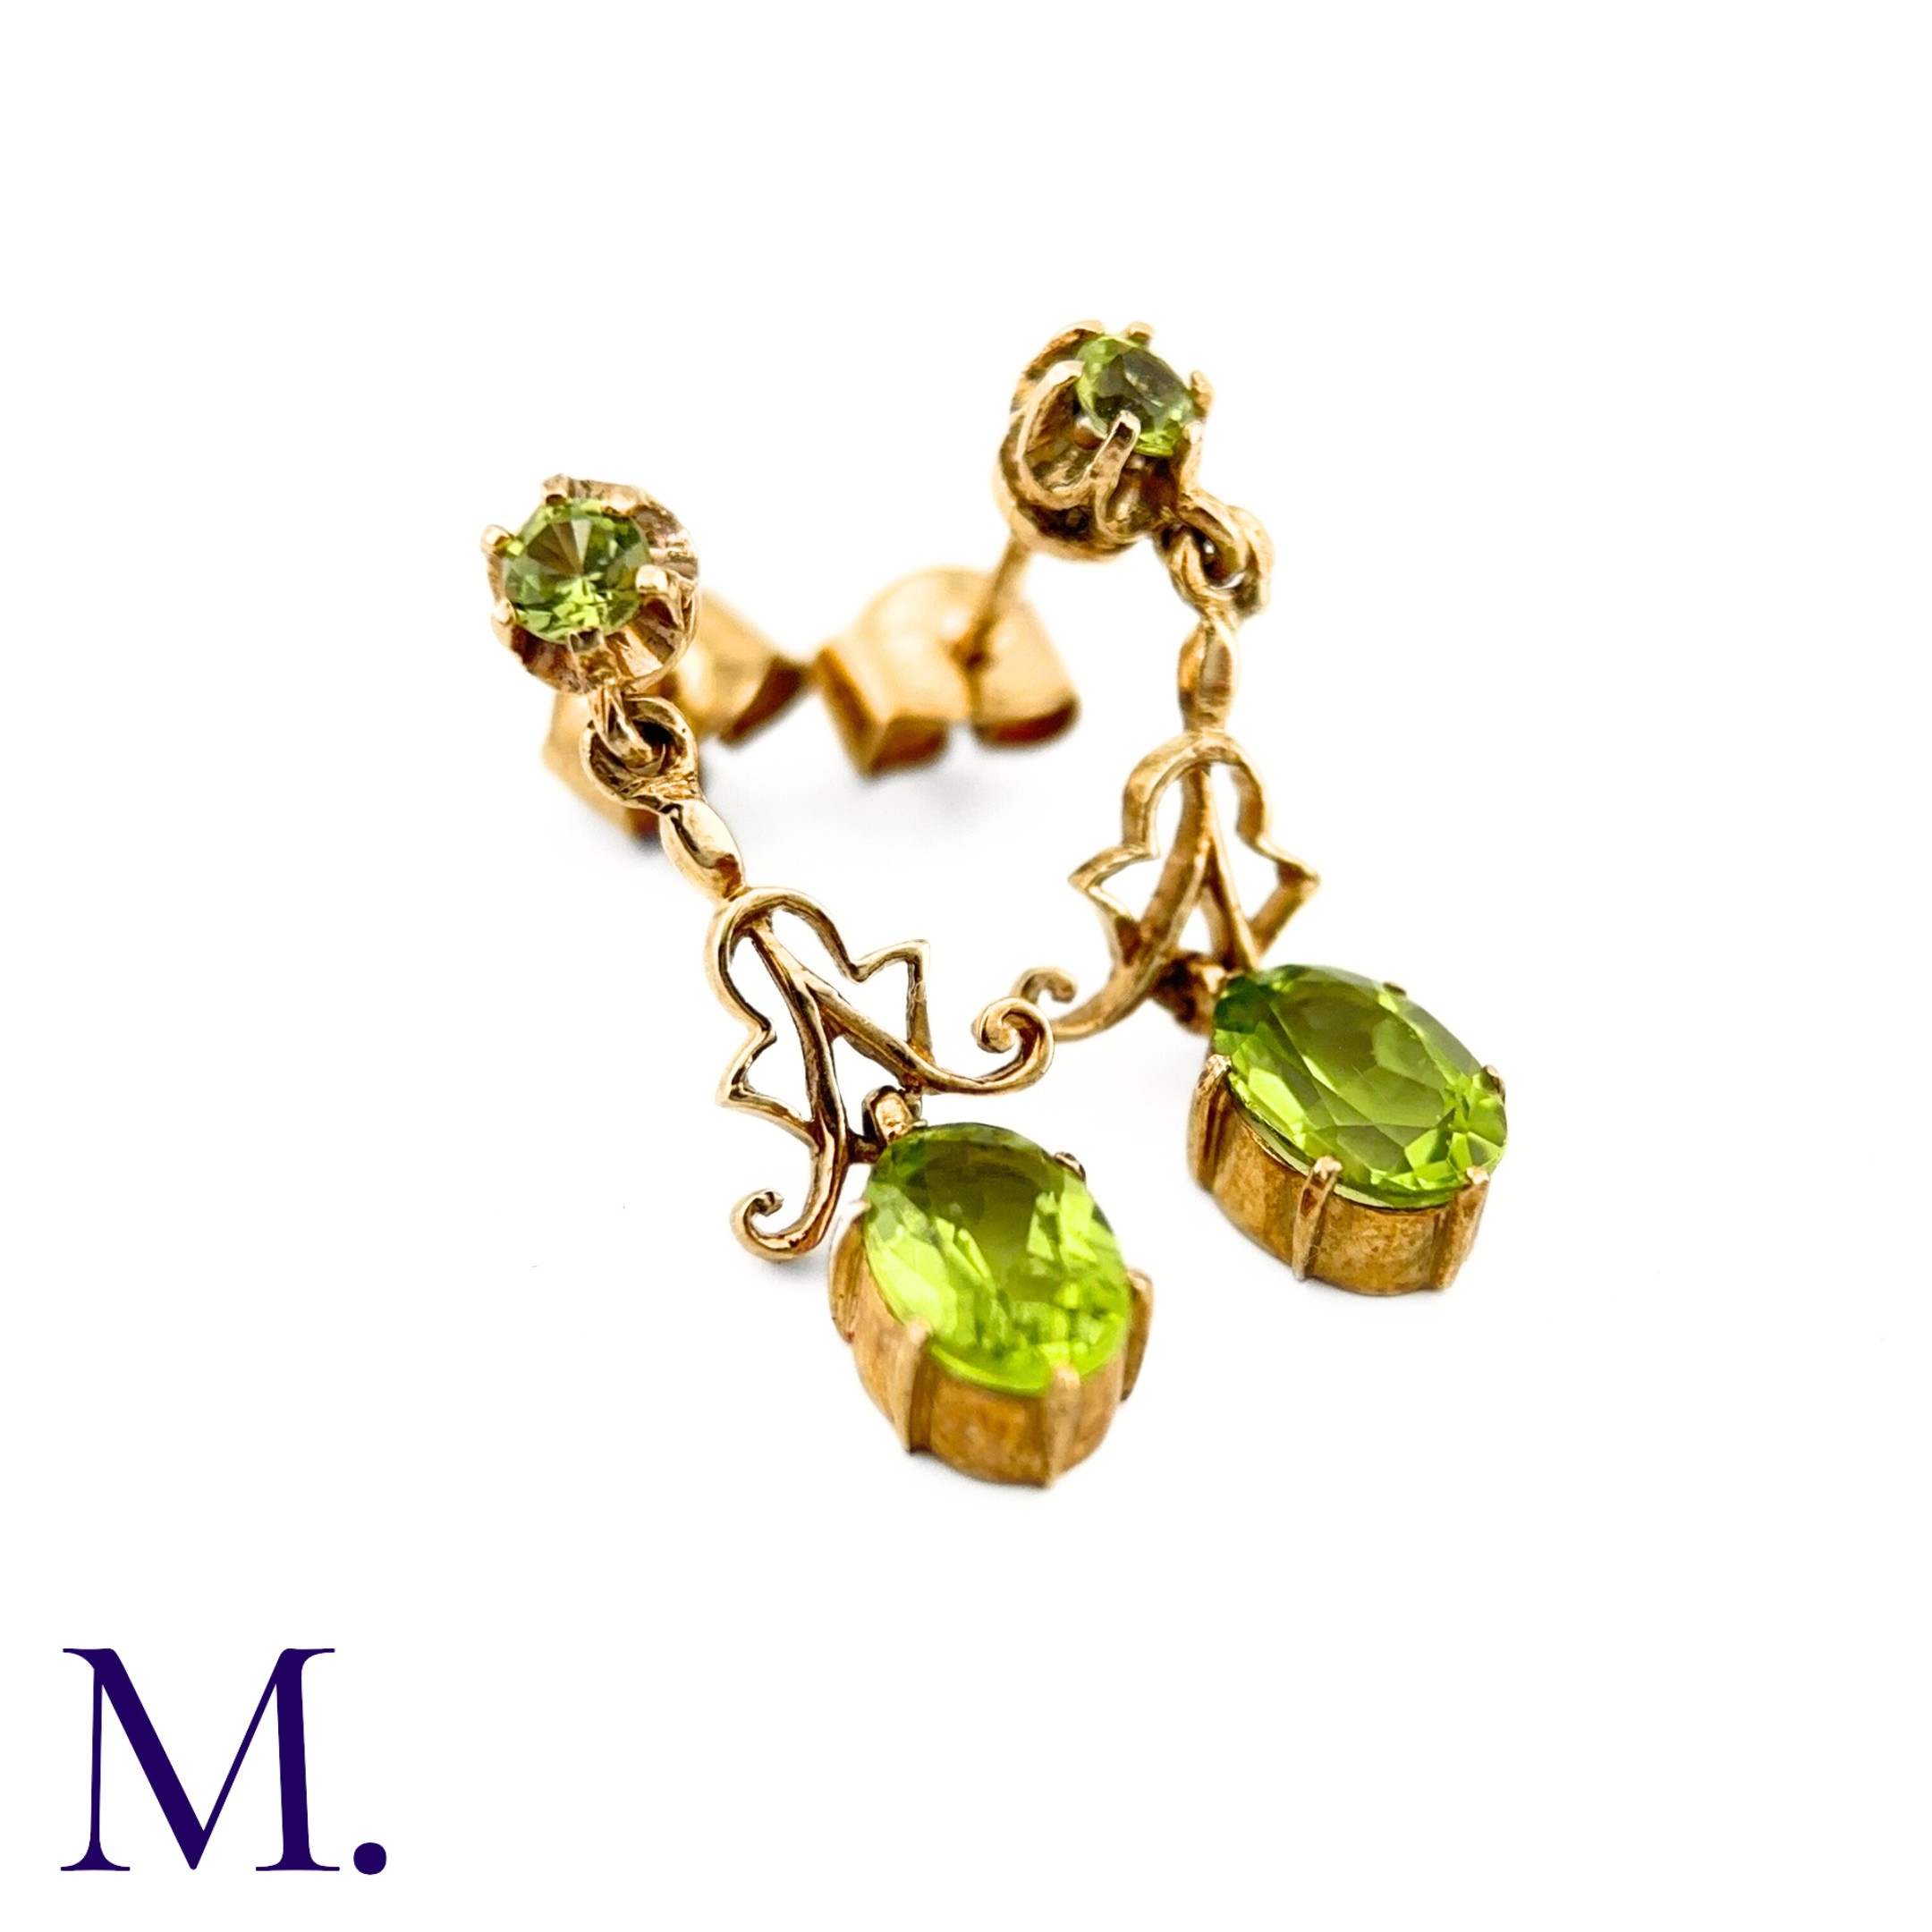 A Pair of Antique Peridot Earrings The peridot earrings are set in 9ct yellow gold. The earrings are - Image 3 of 4